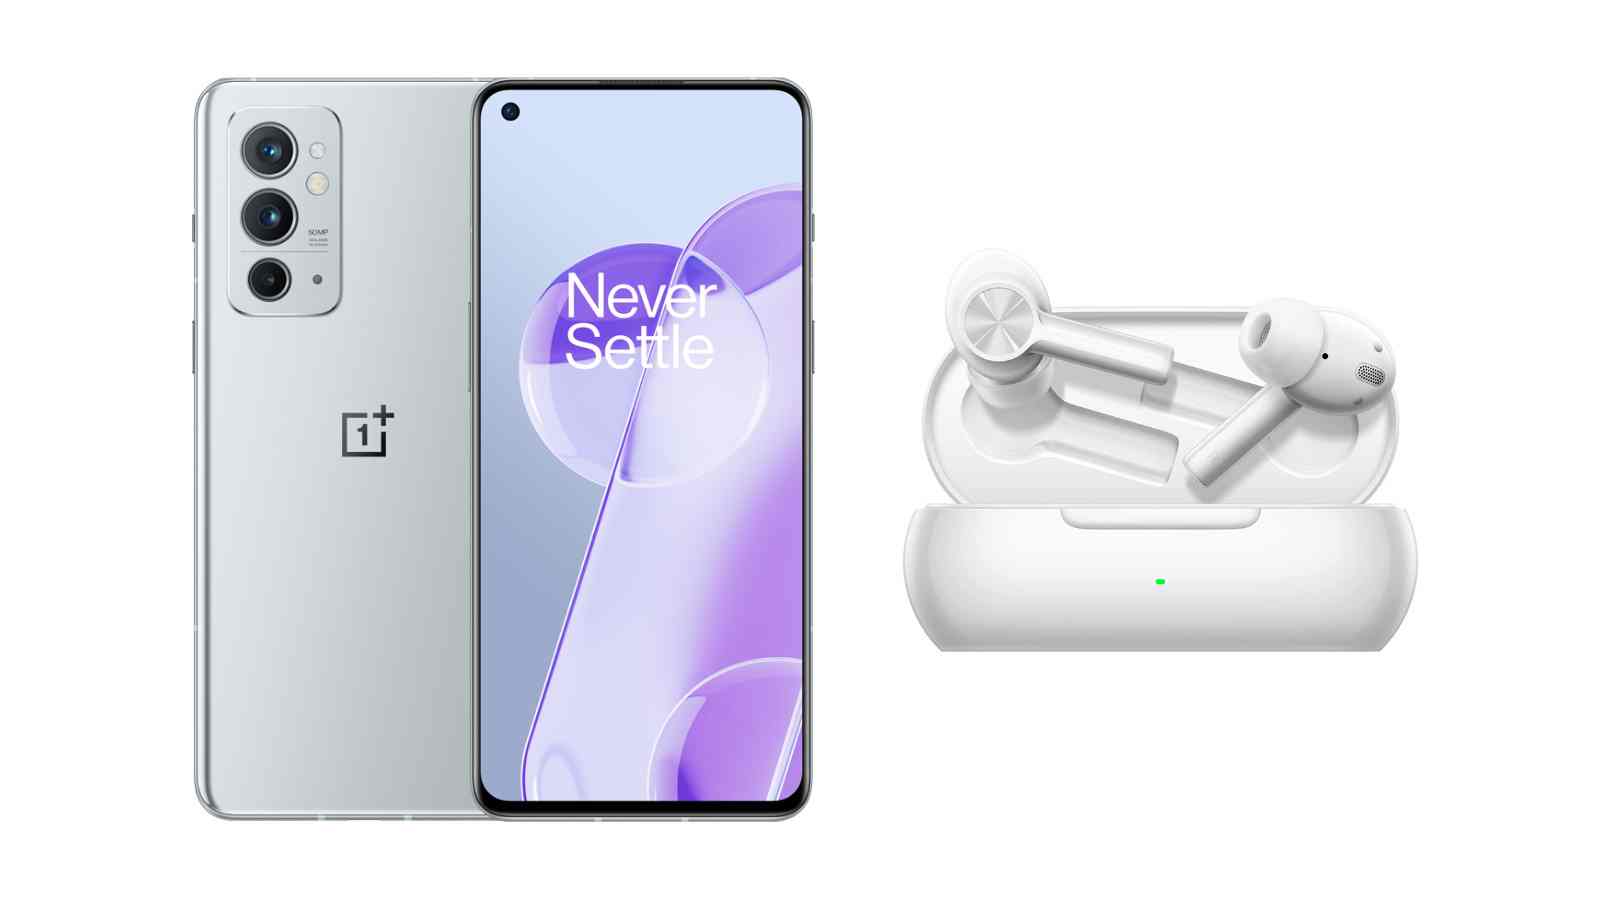 Oneplus 9RT launched in India sporting Snapdragon 888, 50MP triple rear camera: Price, Specifications